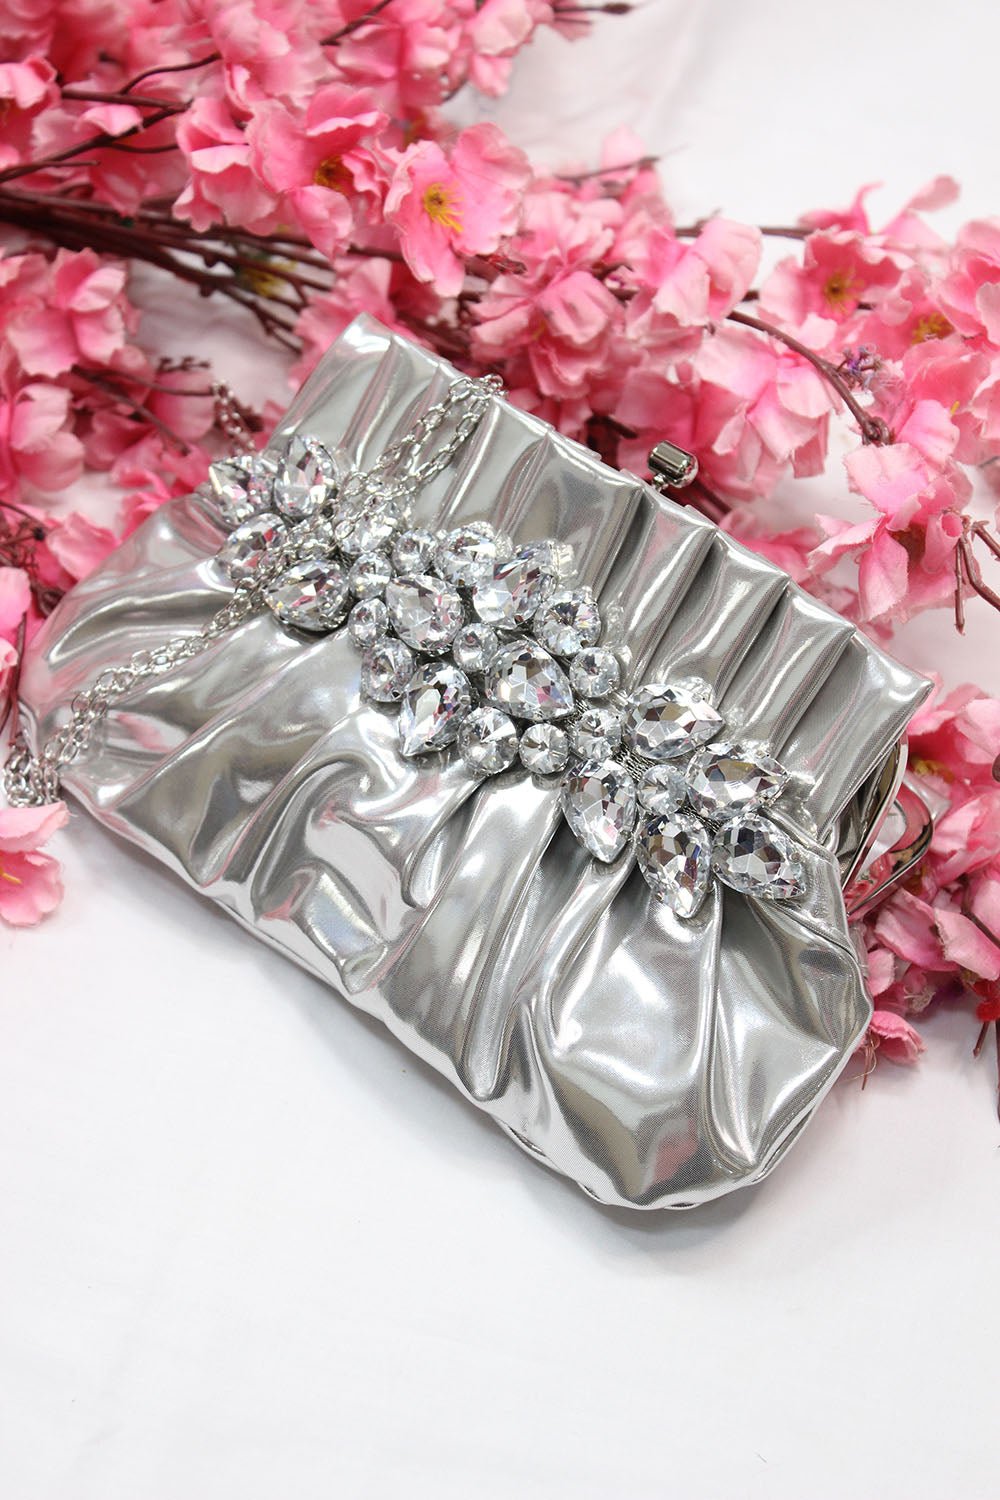 Sparkle & Shine - Make a Statement with Our Exclusive Silver Clutch Sling Bag Collection - Perfect for Any Outfit and Occasion